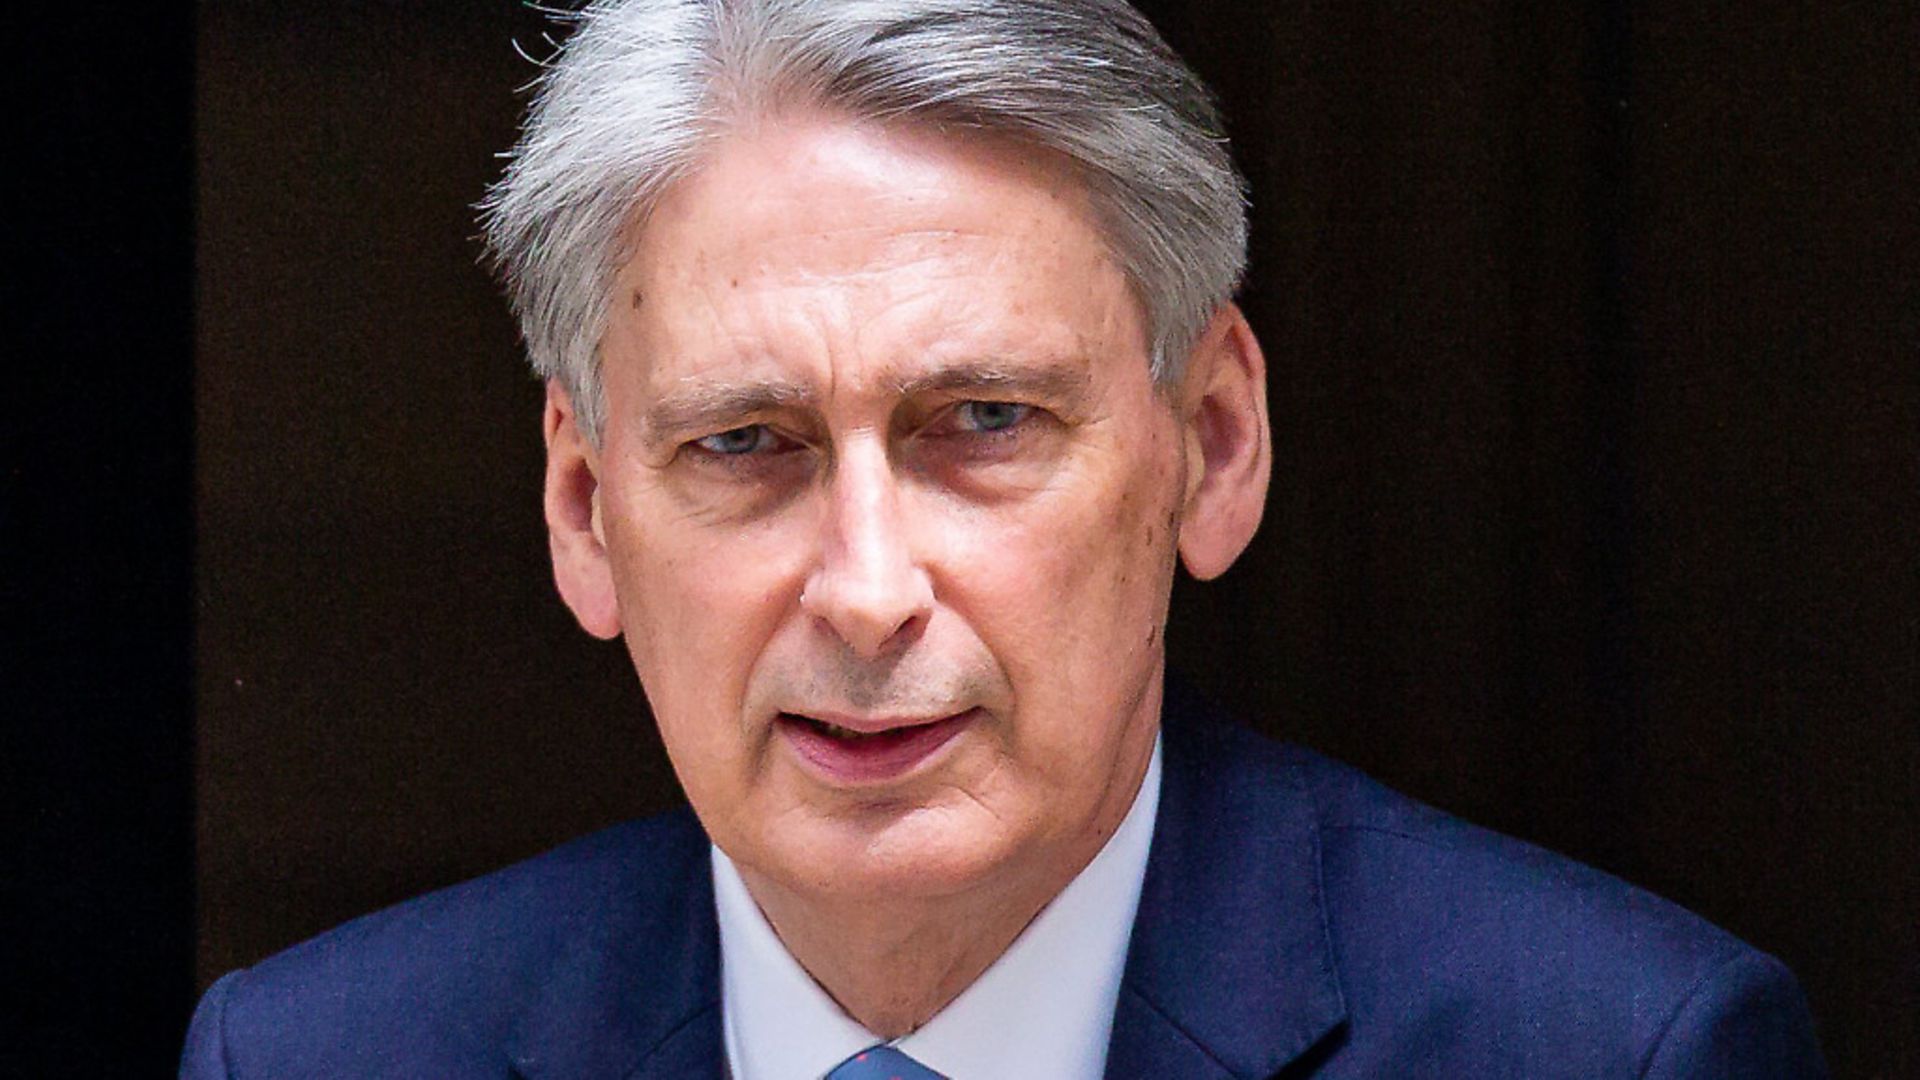 Philip Hammond has bagged himself a number of high-paying roles since leaving politics.  (Photo by Luke Dray/Getty Images) - Credit: Getty Images